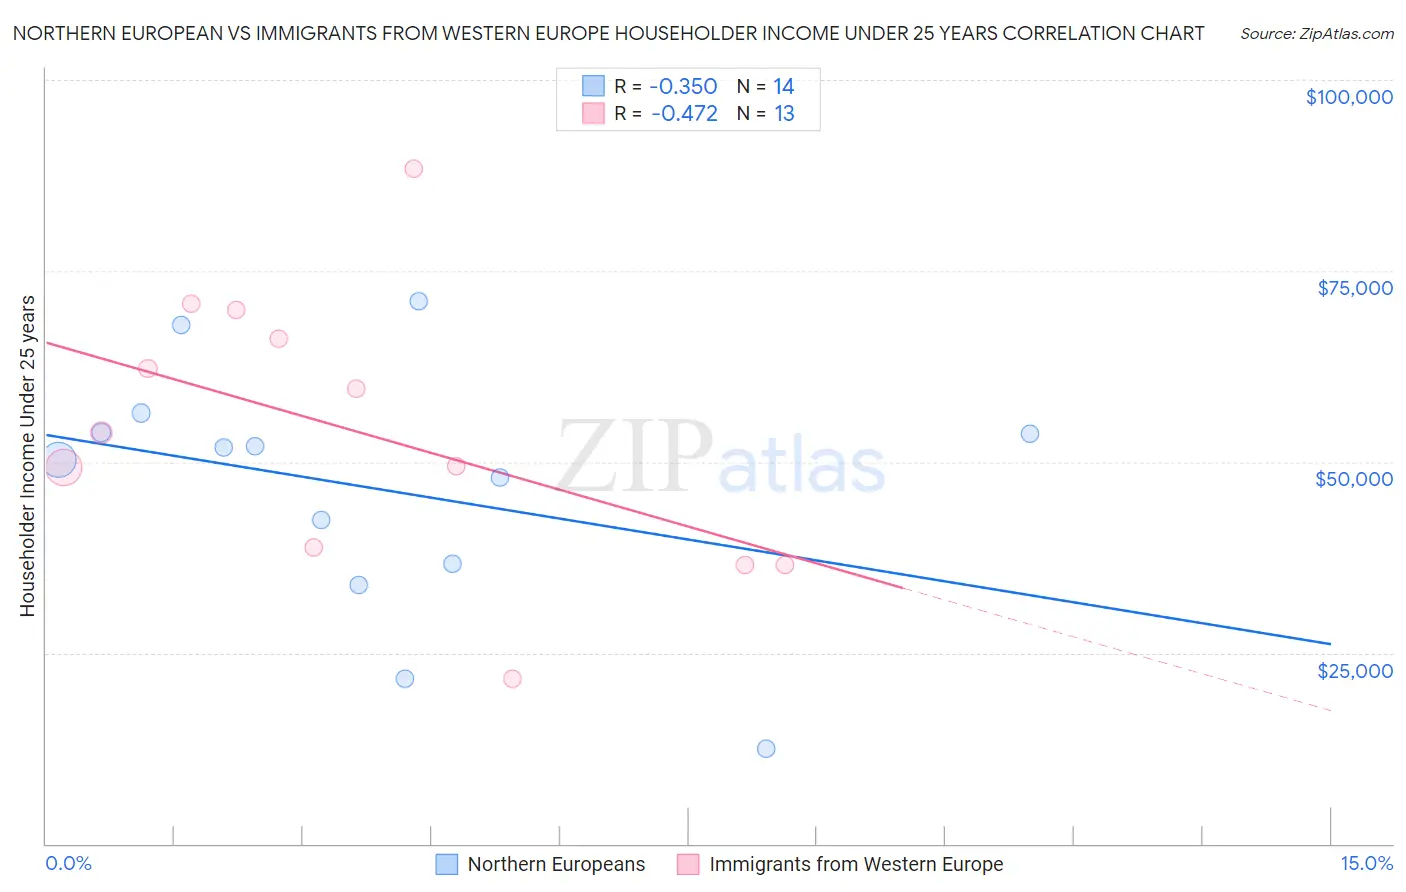 Northern European vs Immigrants from Western Europe Householder Income Under 25 years